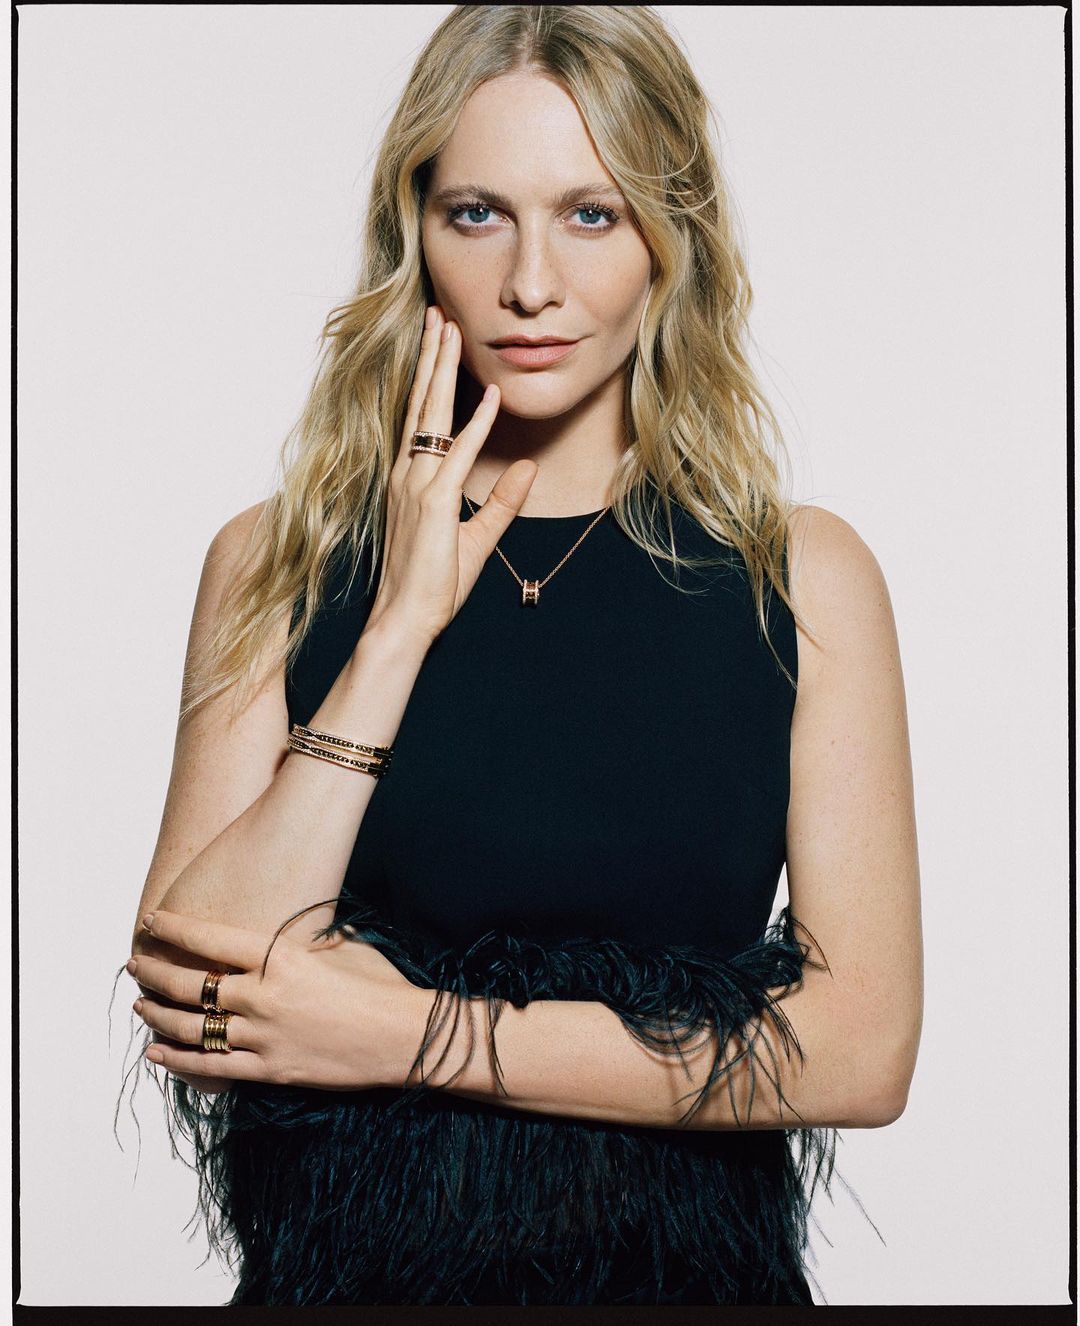 Poppy Delevingne West Age, Height, Wife, Family – Biographyprofiles